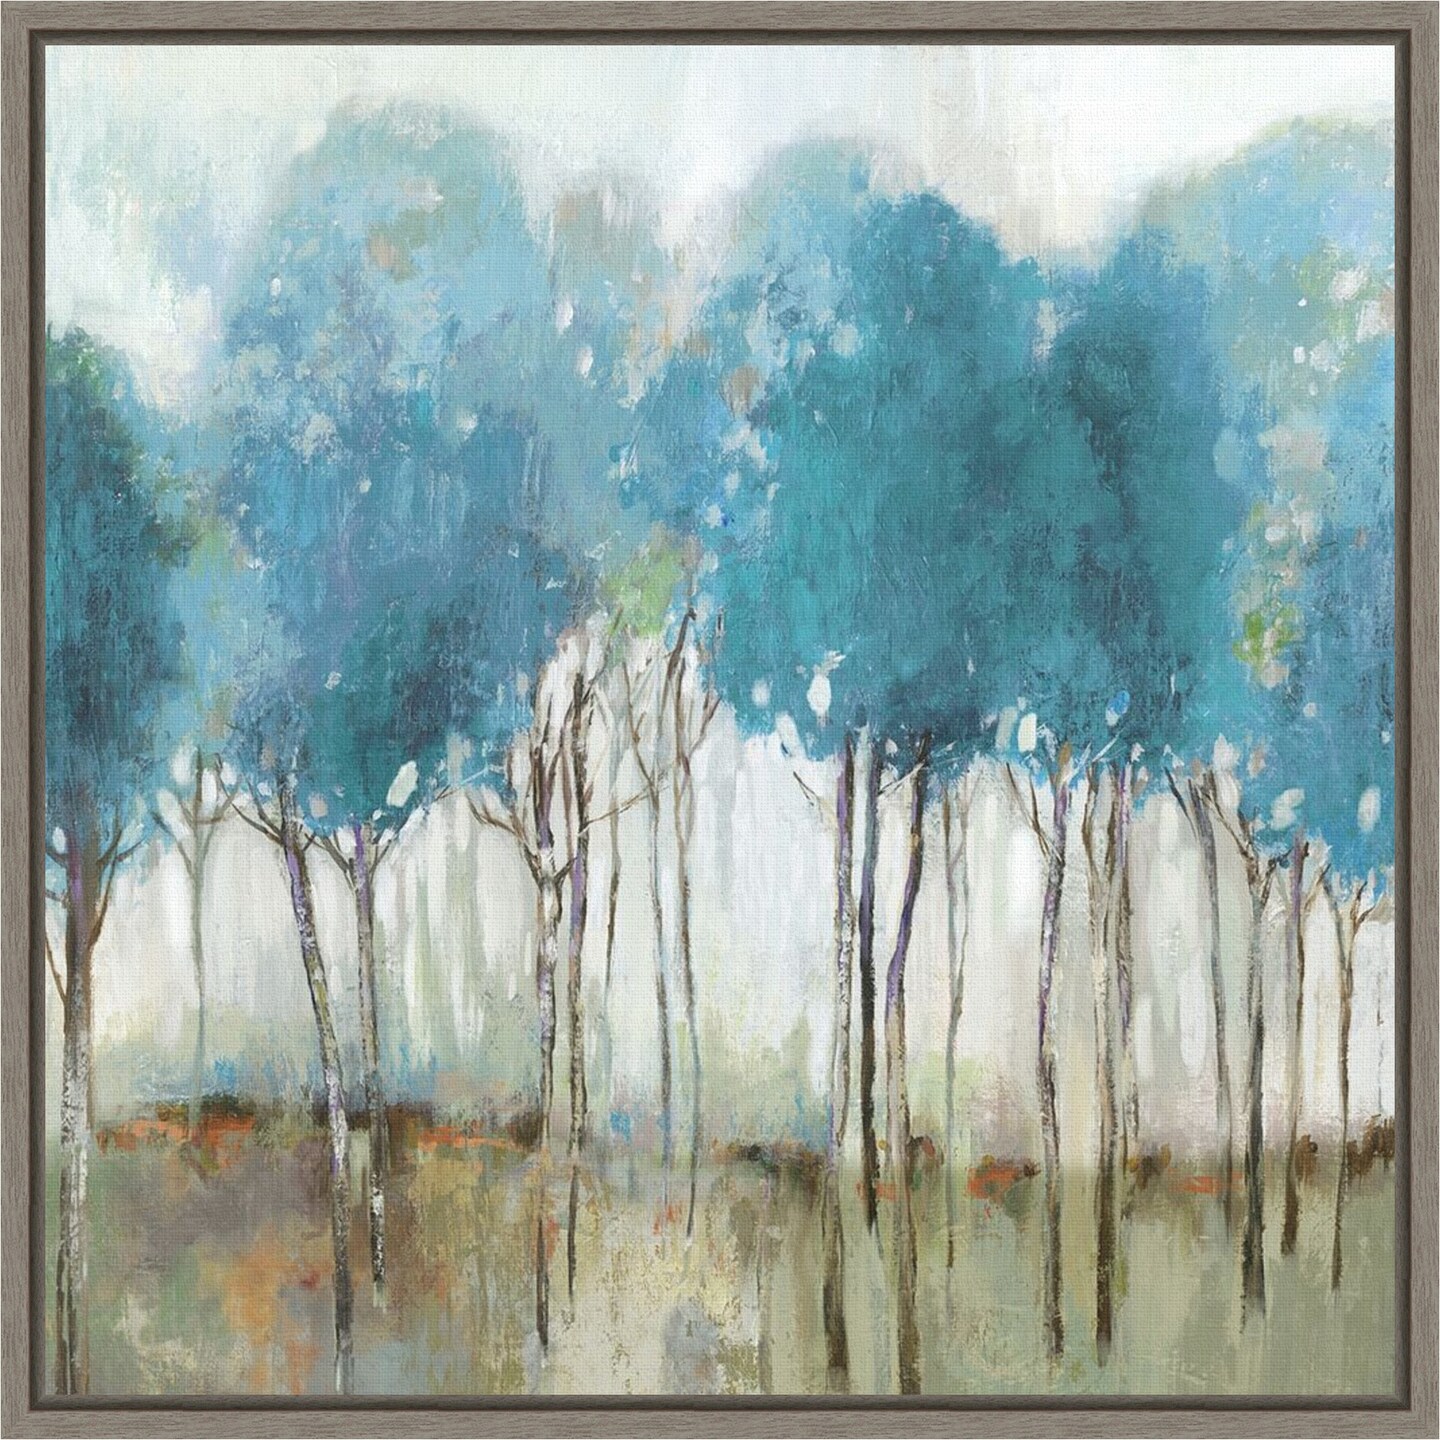 Misty Meadow I (Teal Trees) by Allison Pearce 16-in. W x 16-in. H. Canvas Wall Art Print Framed in Grey